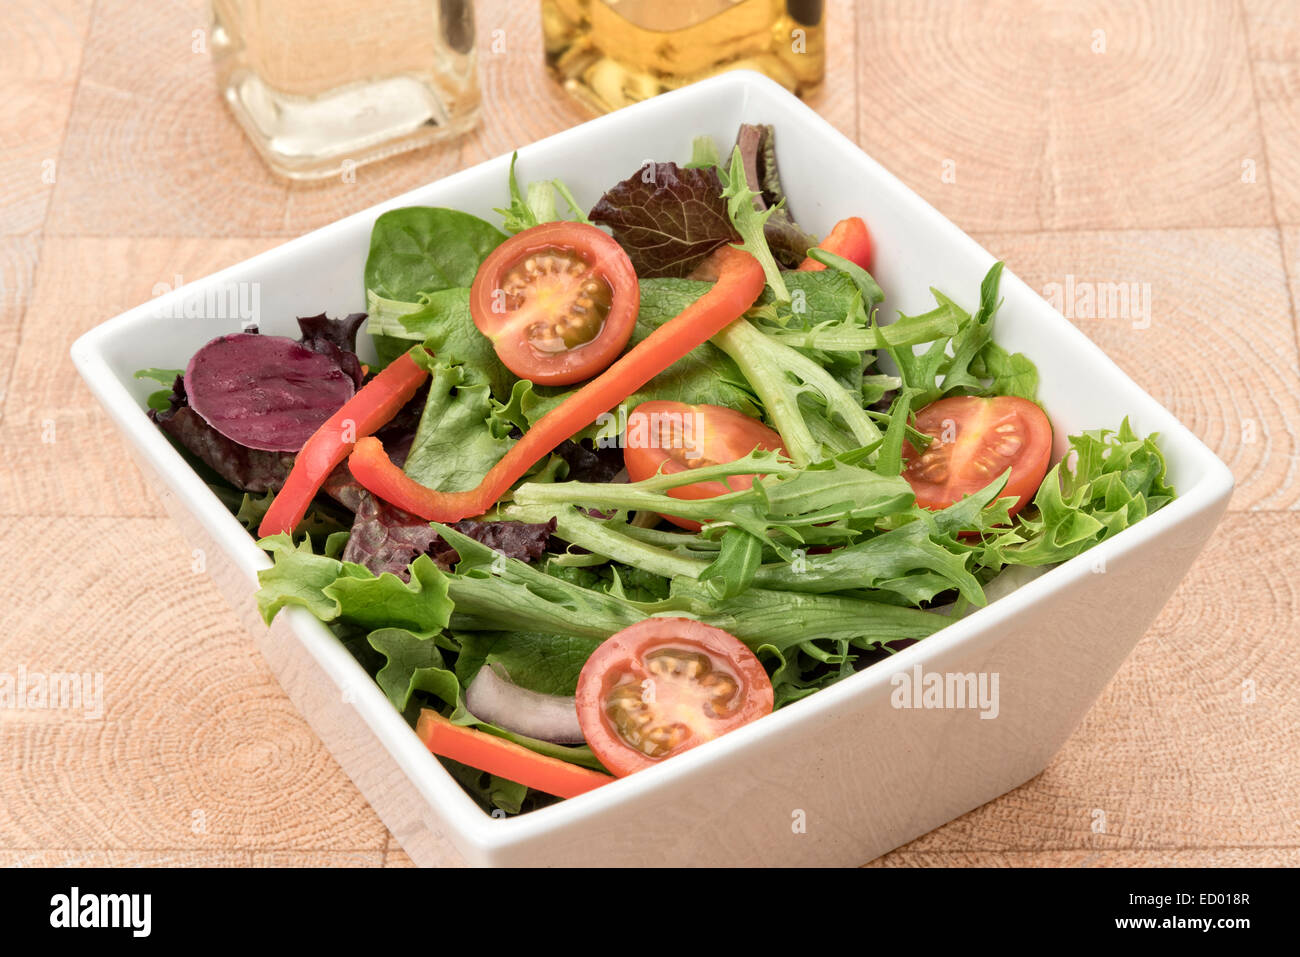 Fresh green salad with tomatoes and red bell peppers - studio shot with a white background Stock Photo